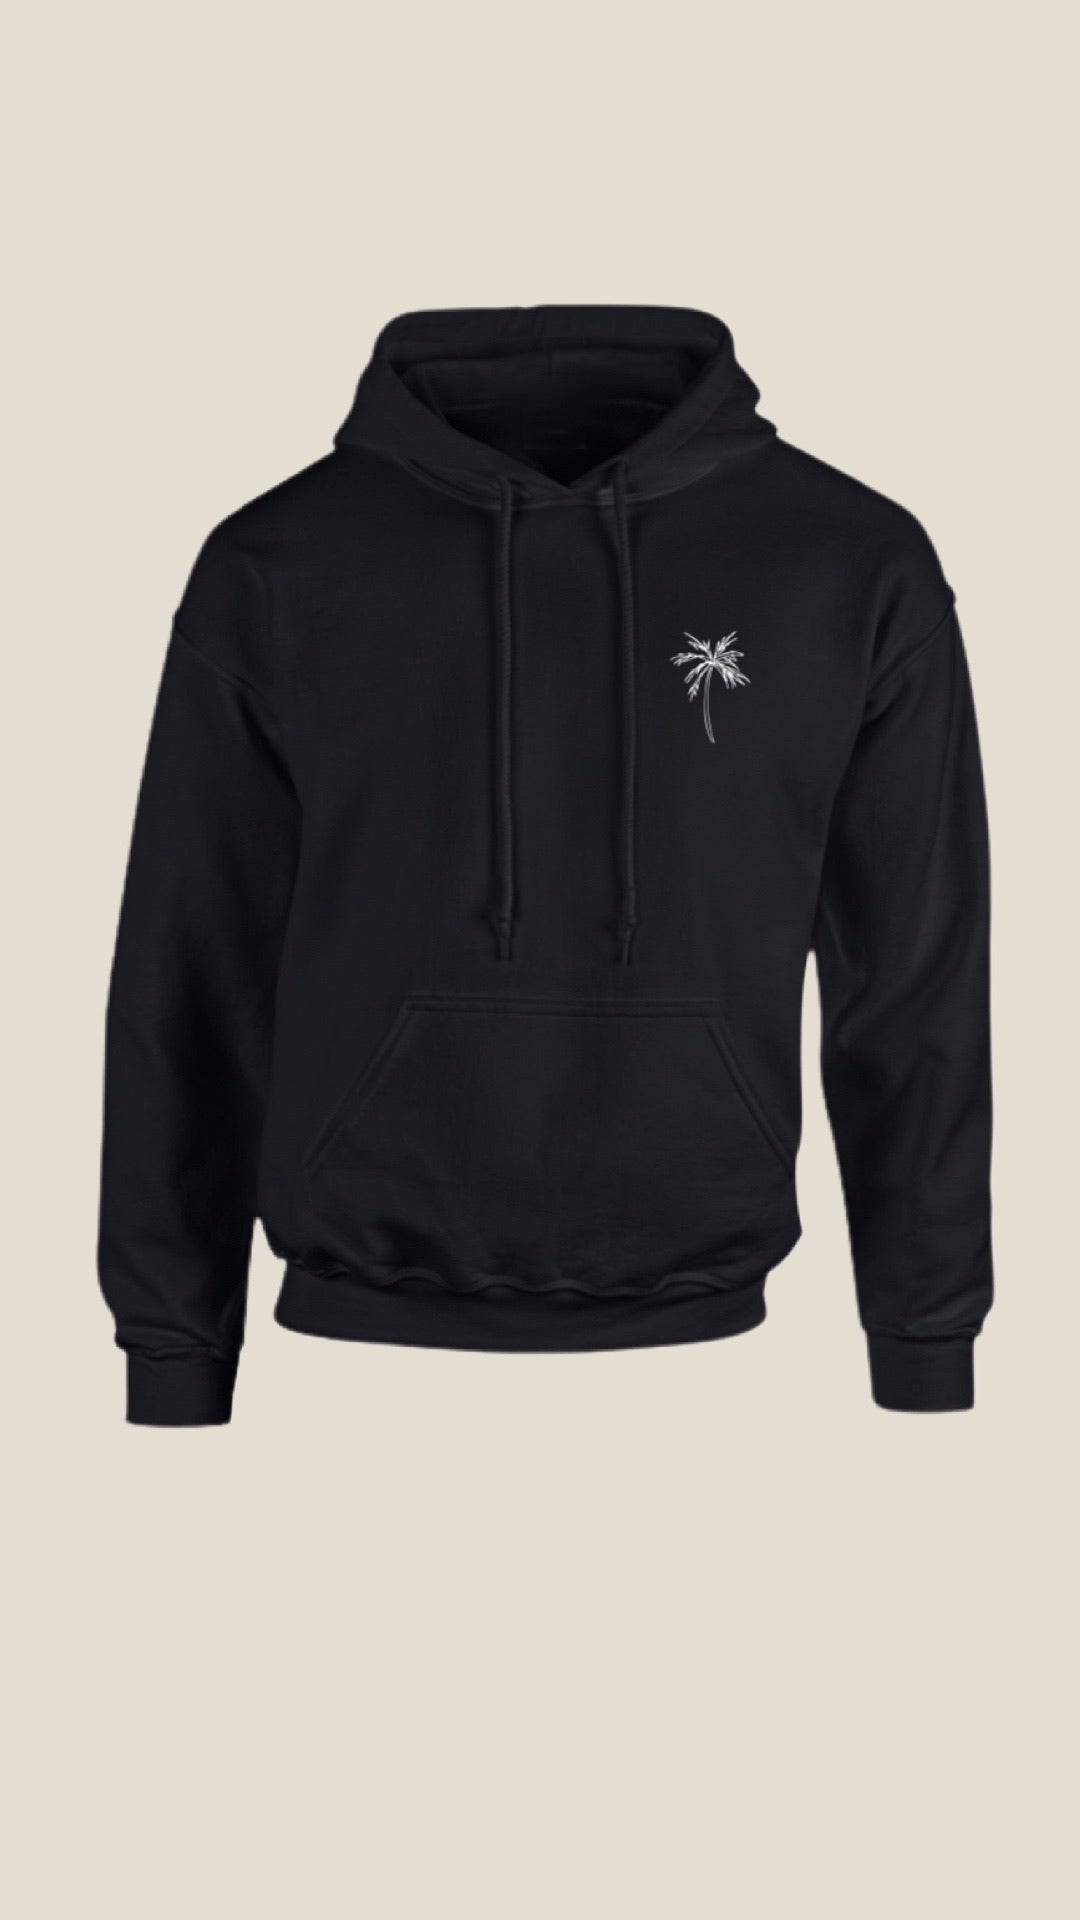 New Palm hoodie black - NewPalm Collection